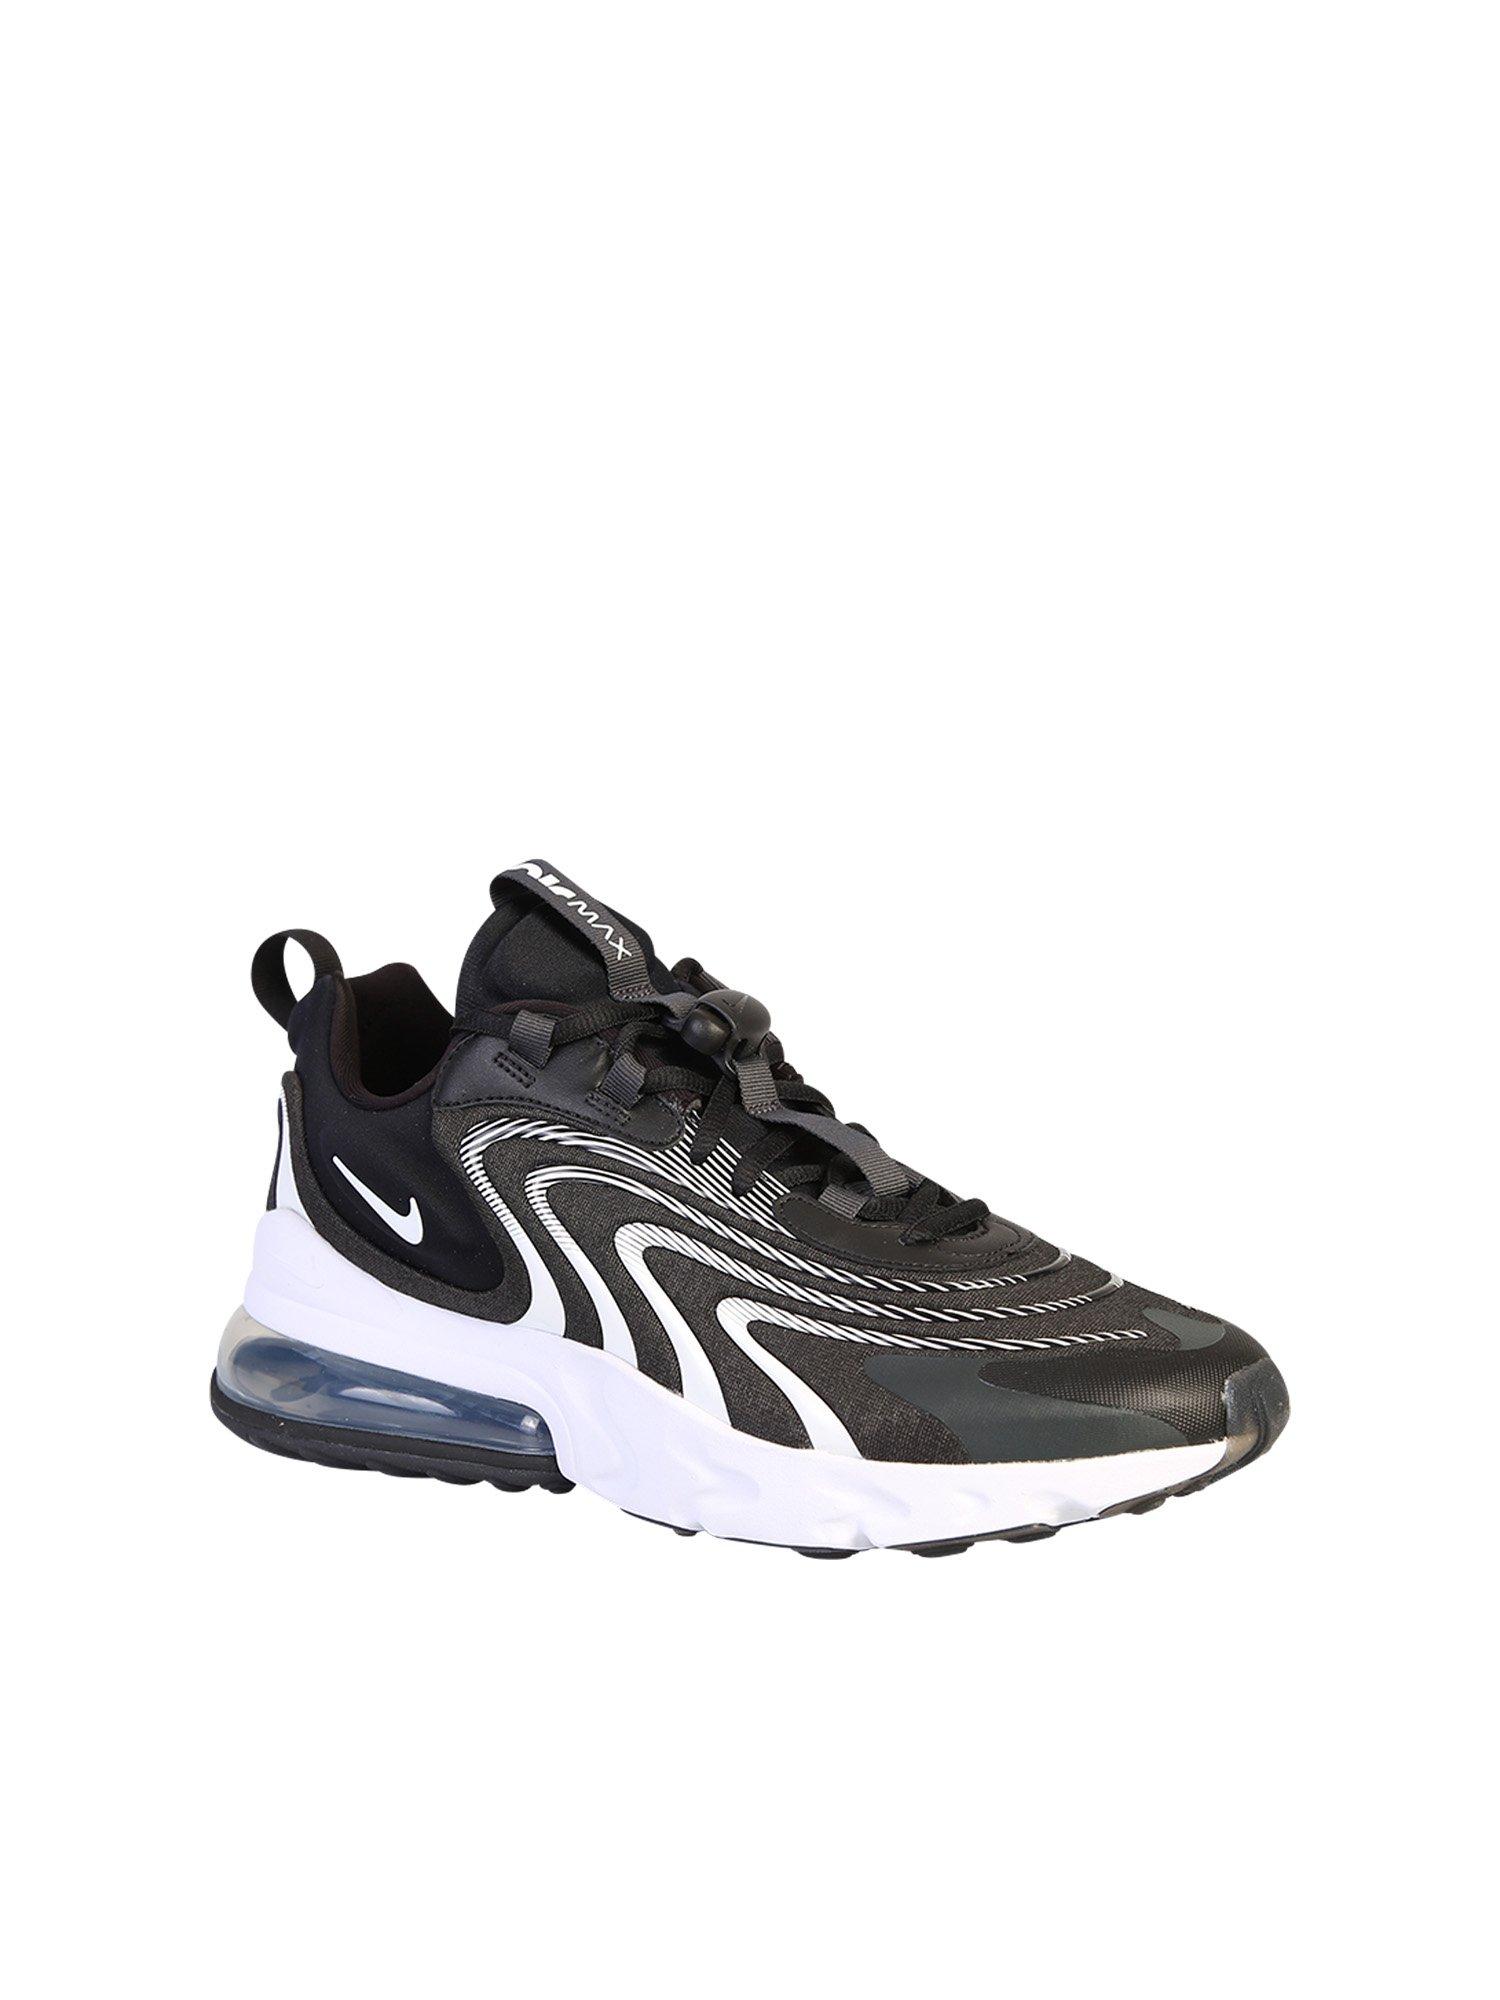 Nike Synthetic Air Max 270 React Eng Sneakers in Black for Men - Lyst